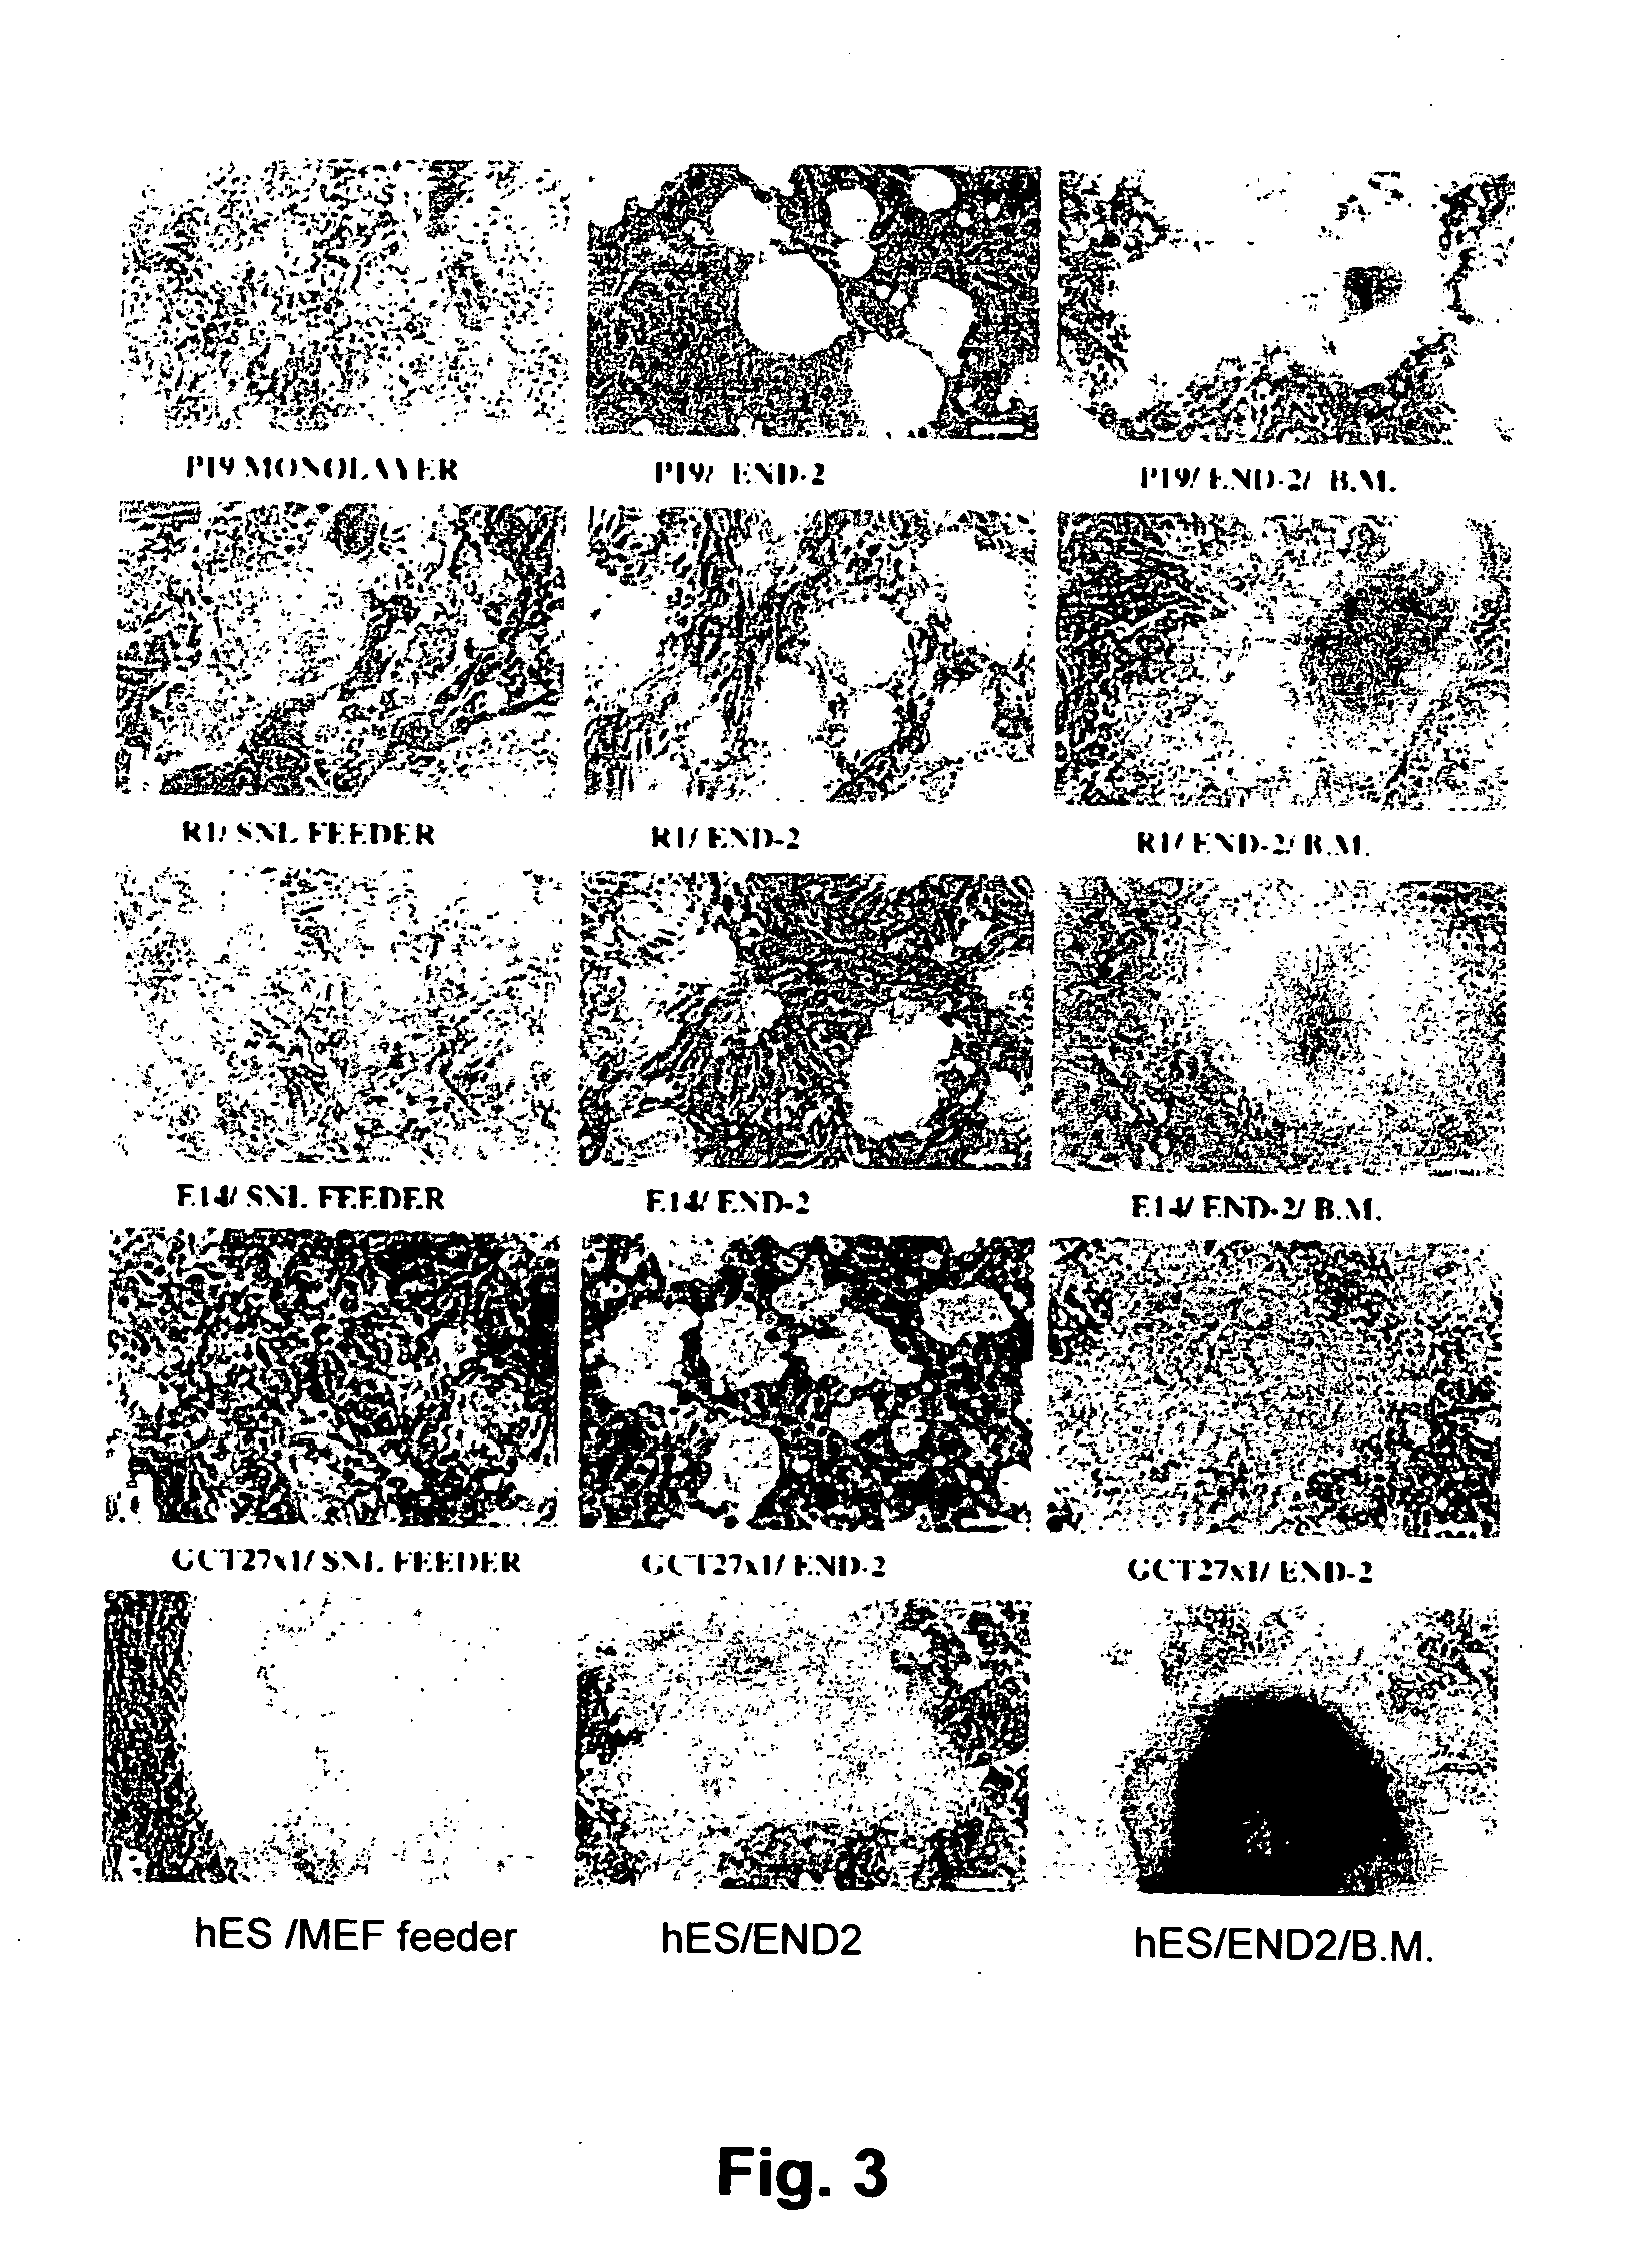 Methods of inducing differentiation of stem cells